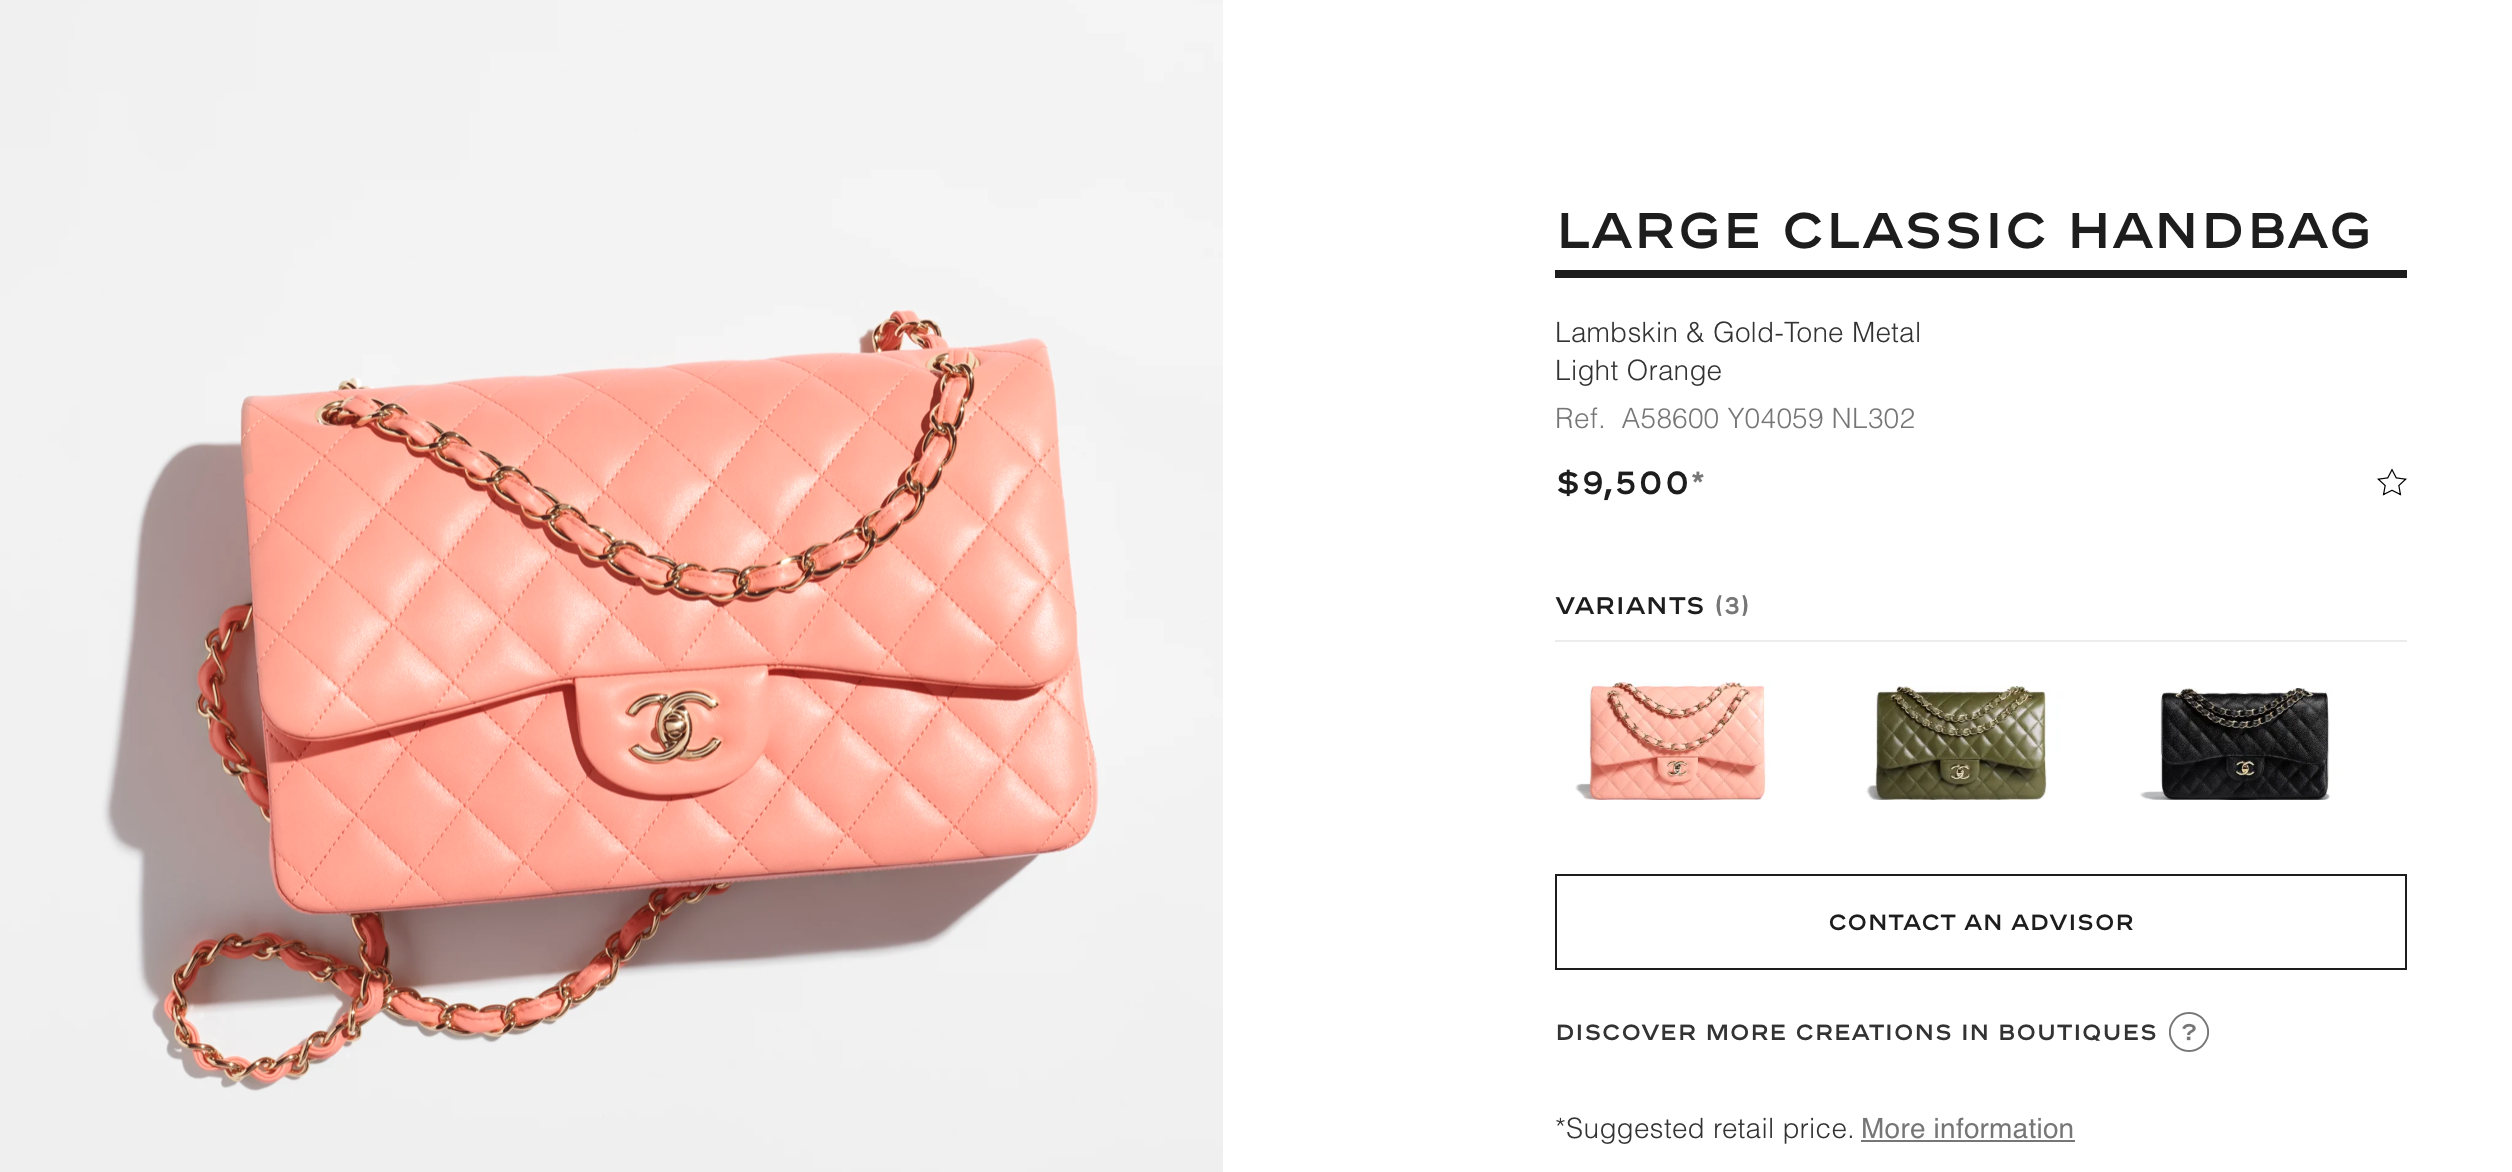 Chanel Increases Prices for 2023: Here's What You Need to Know - PurseBlog